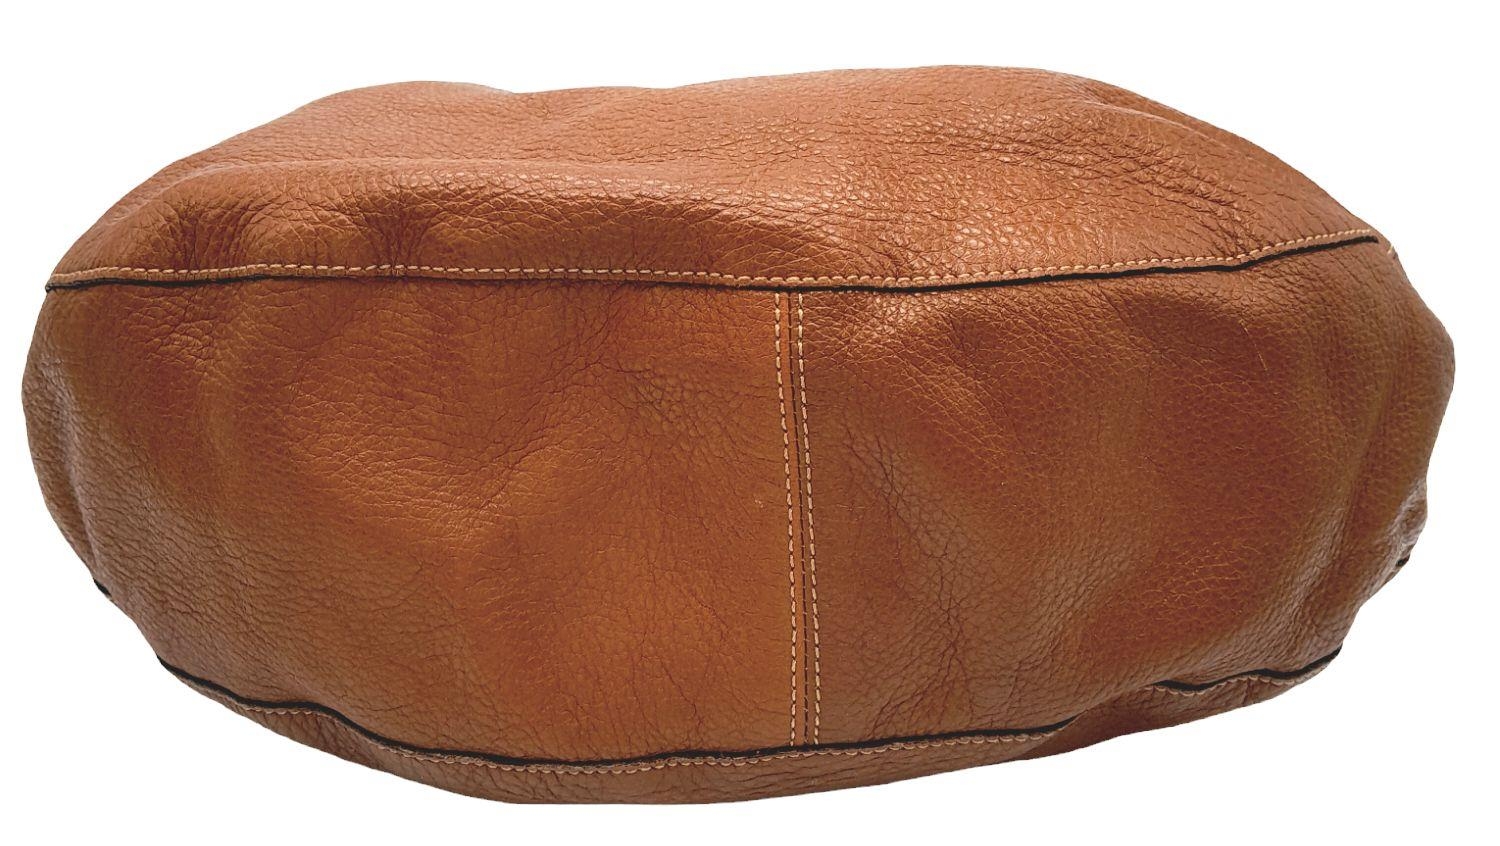 A Mulberry Tan Daria Hobo Bag. Leather exterior with gold-toned hardware, braided strap and zip - Image 2 of 8